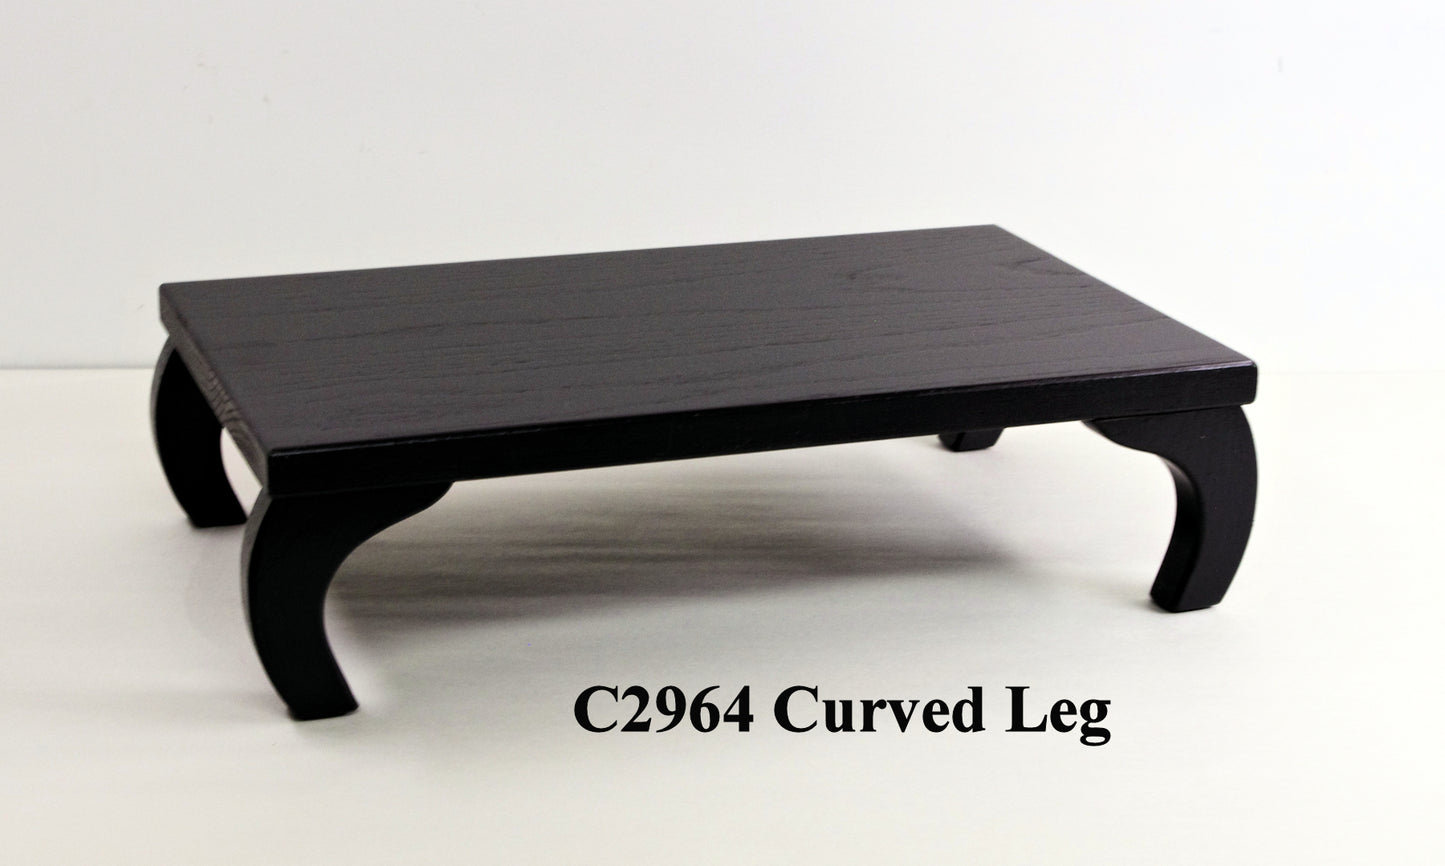 Bonsai Stand Curved Leg C2964 Made to Order 20" Length